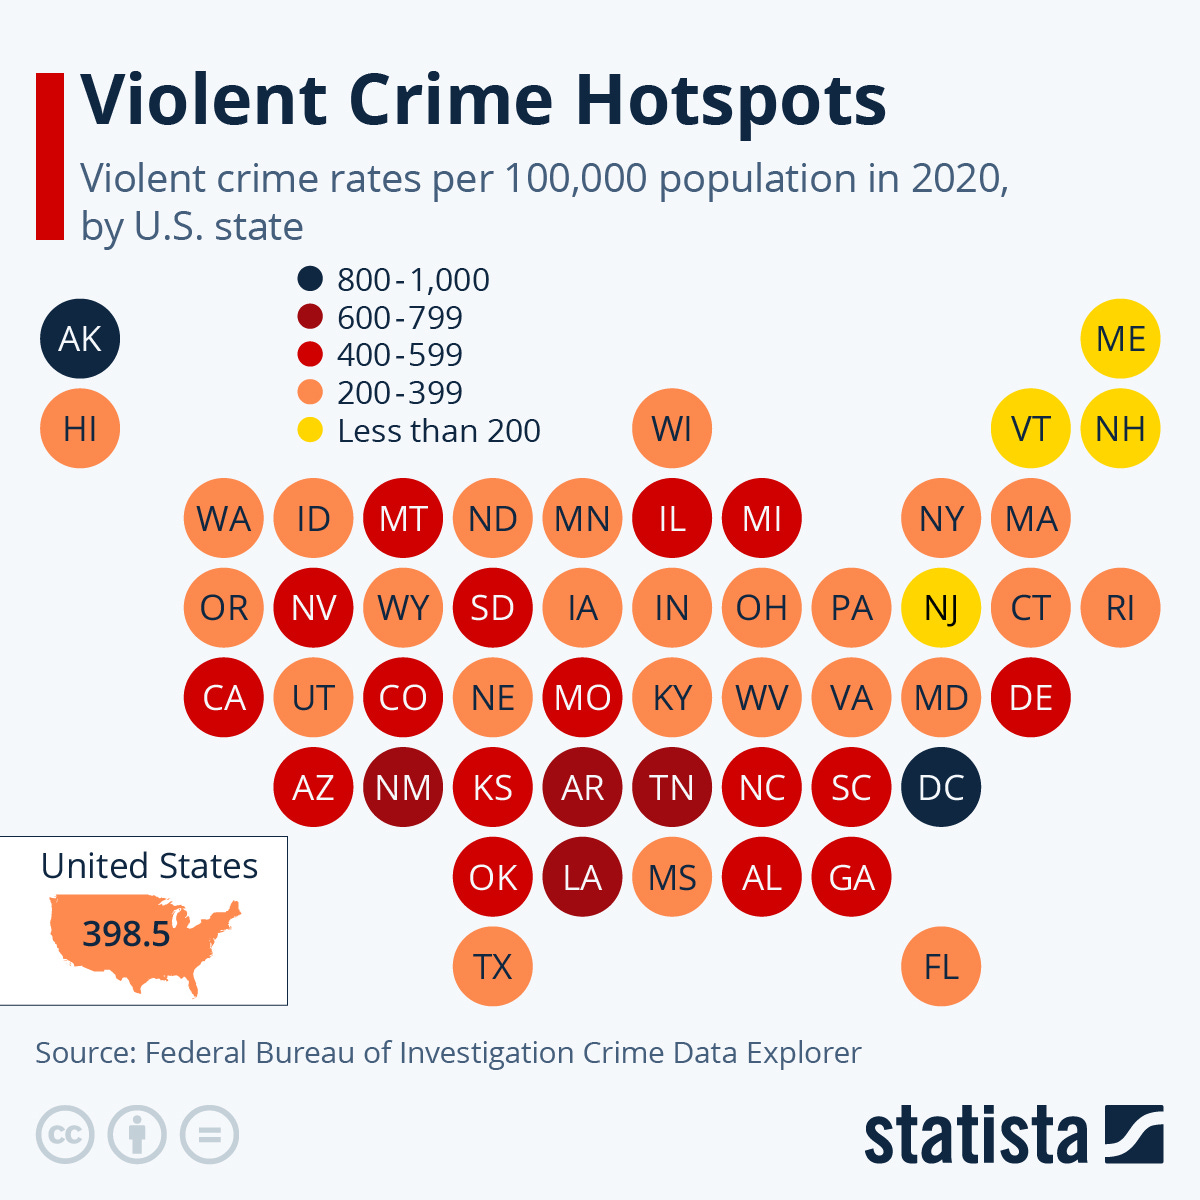 The District of Columbia had the Highest Rates of Violent Crime in the